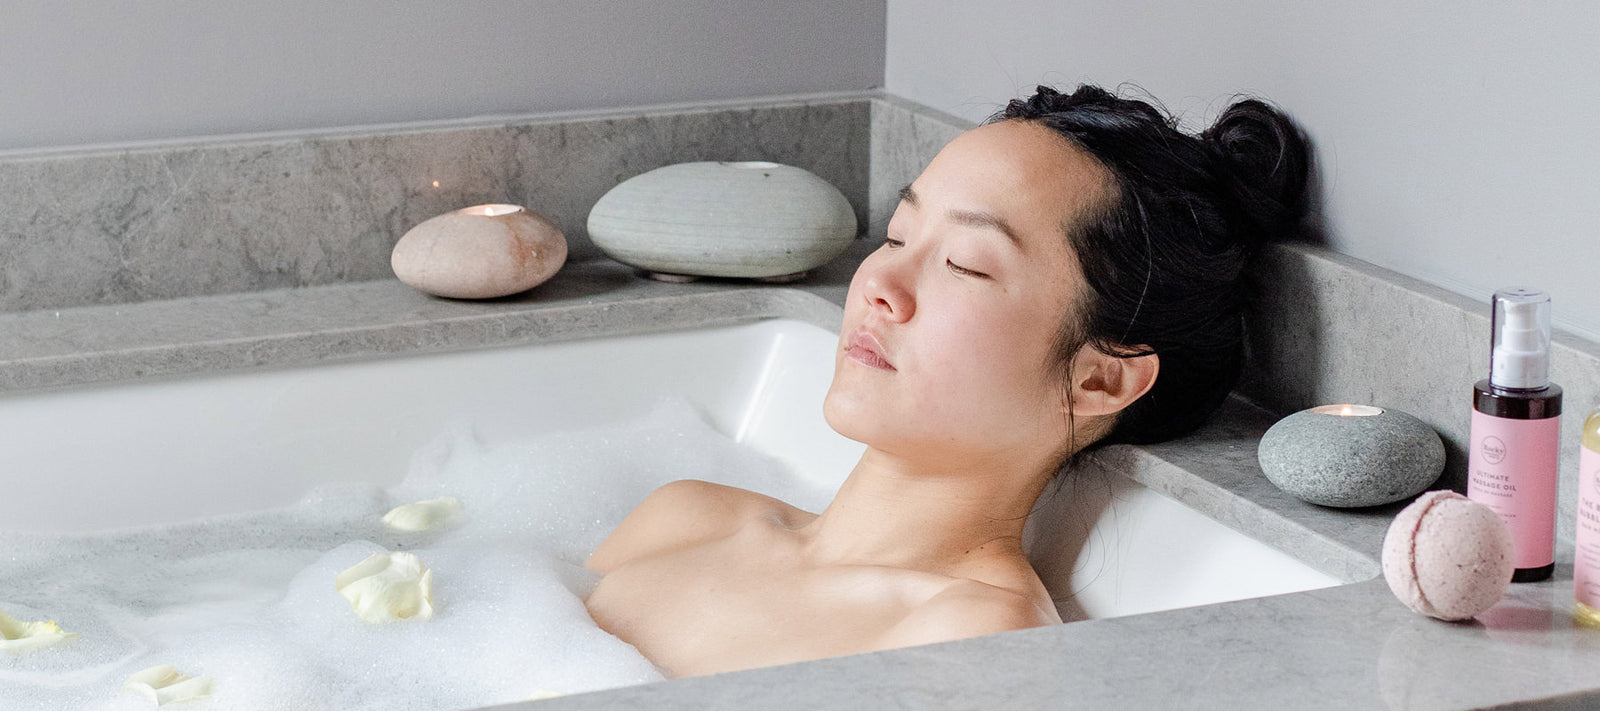 Science agrees: A bubble bath is so much better for your mental